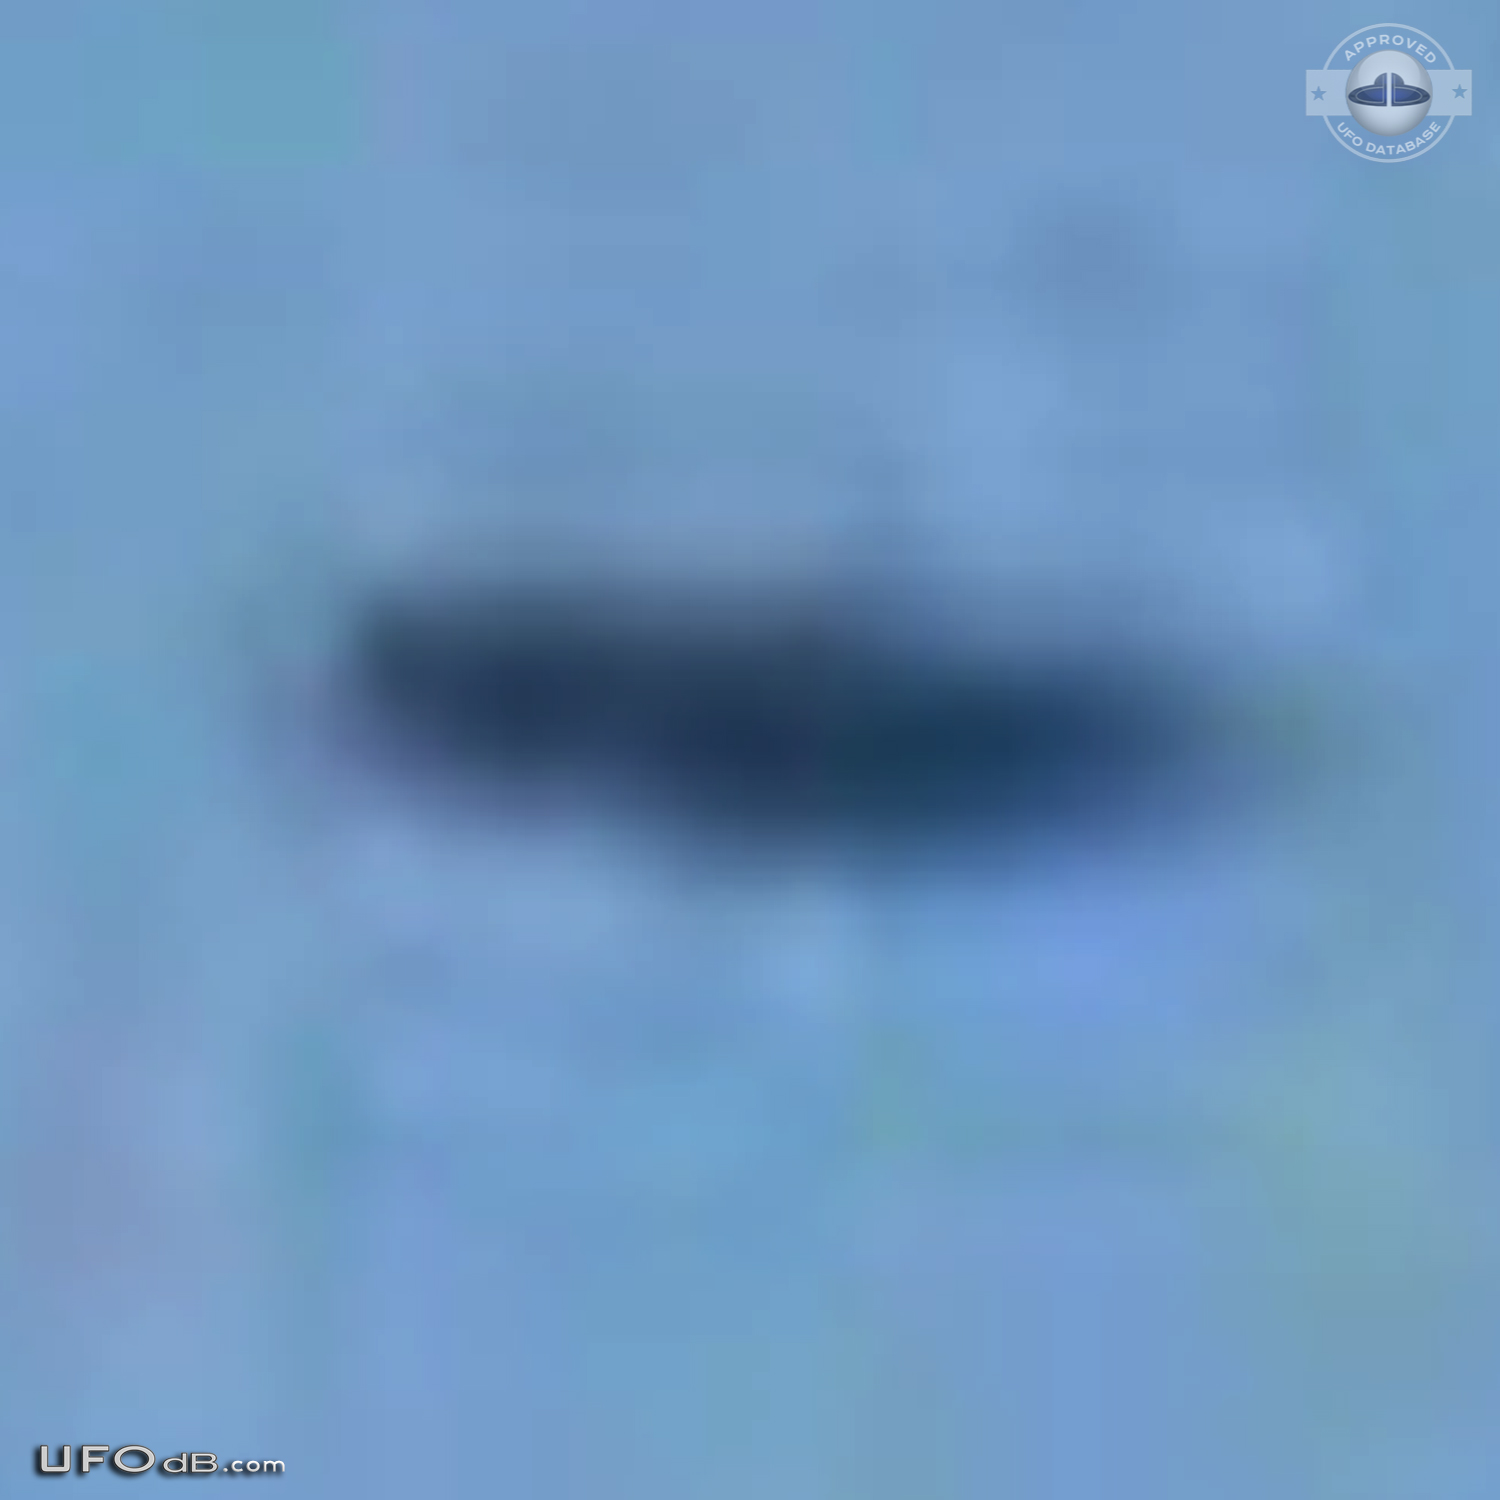 Silver saucer UFO caught on picture in Clarksville Tennessee USA 2012 UFO Picture #473-4